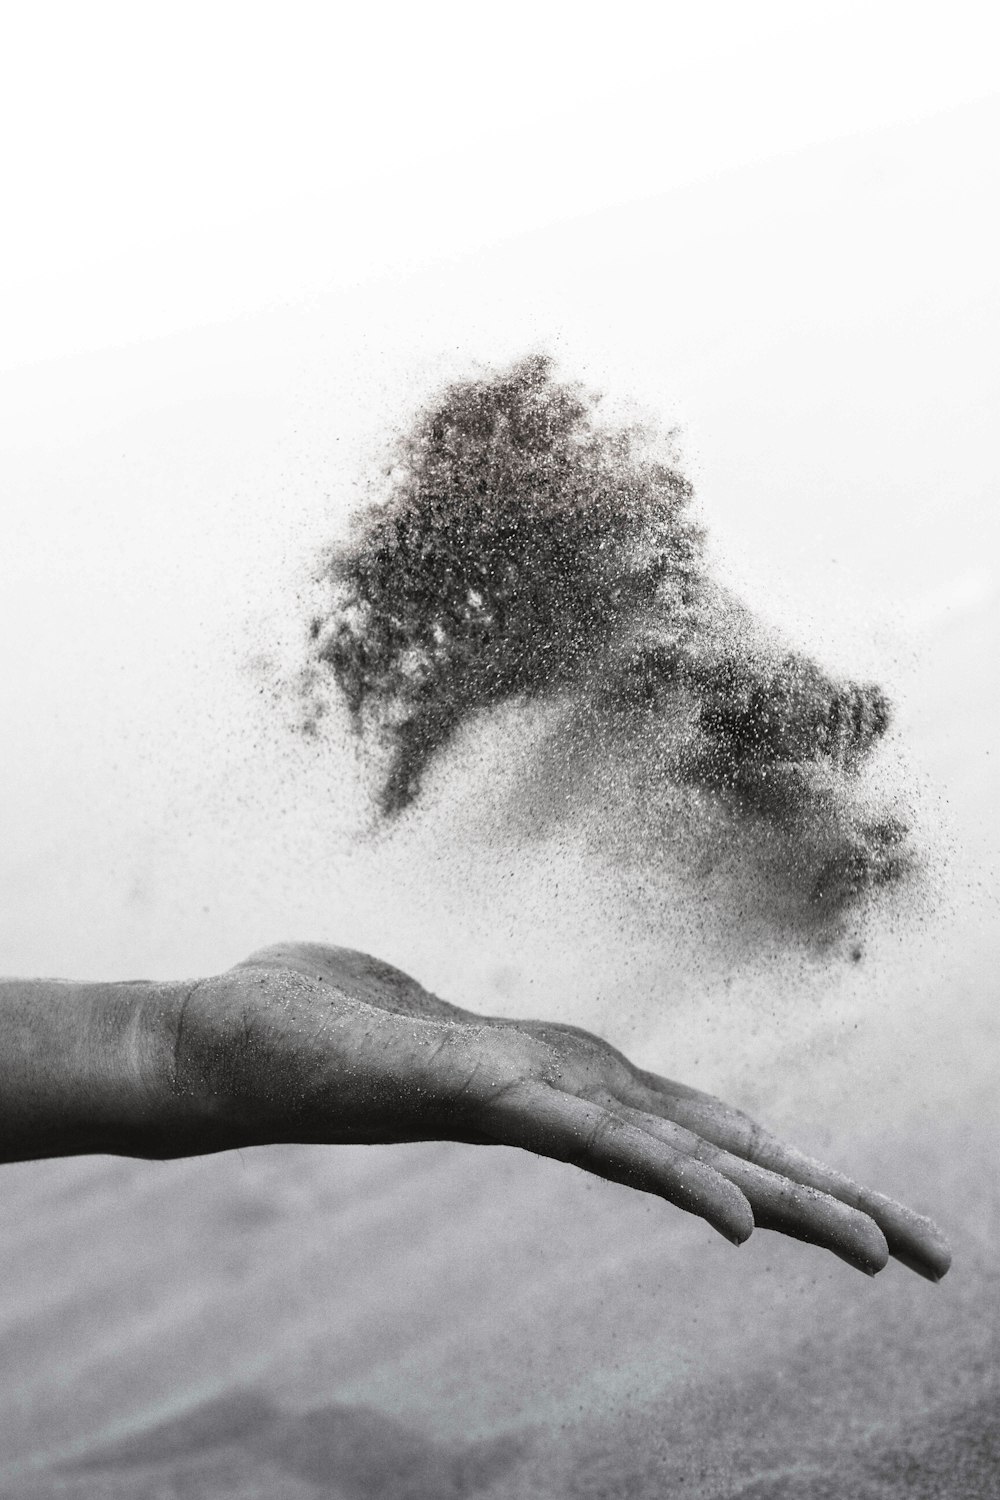 grayscaled photography of person's hand spreading sand